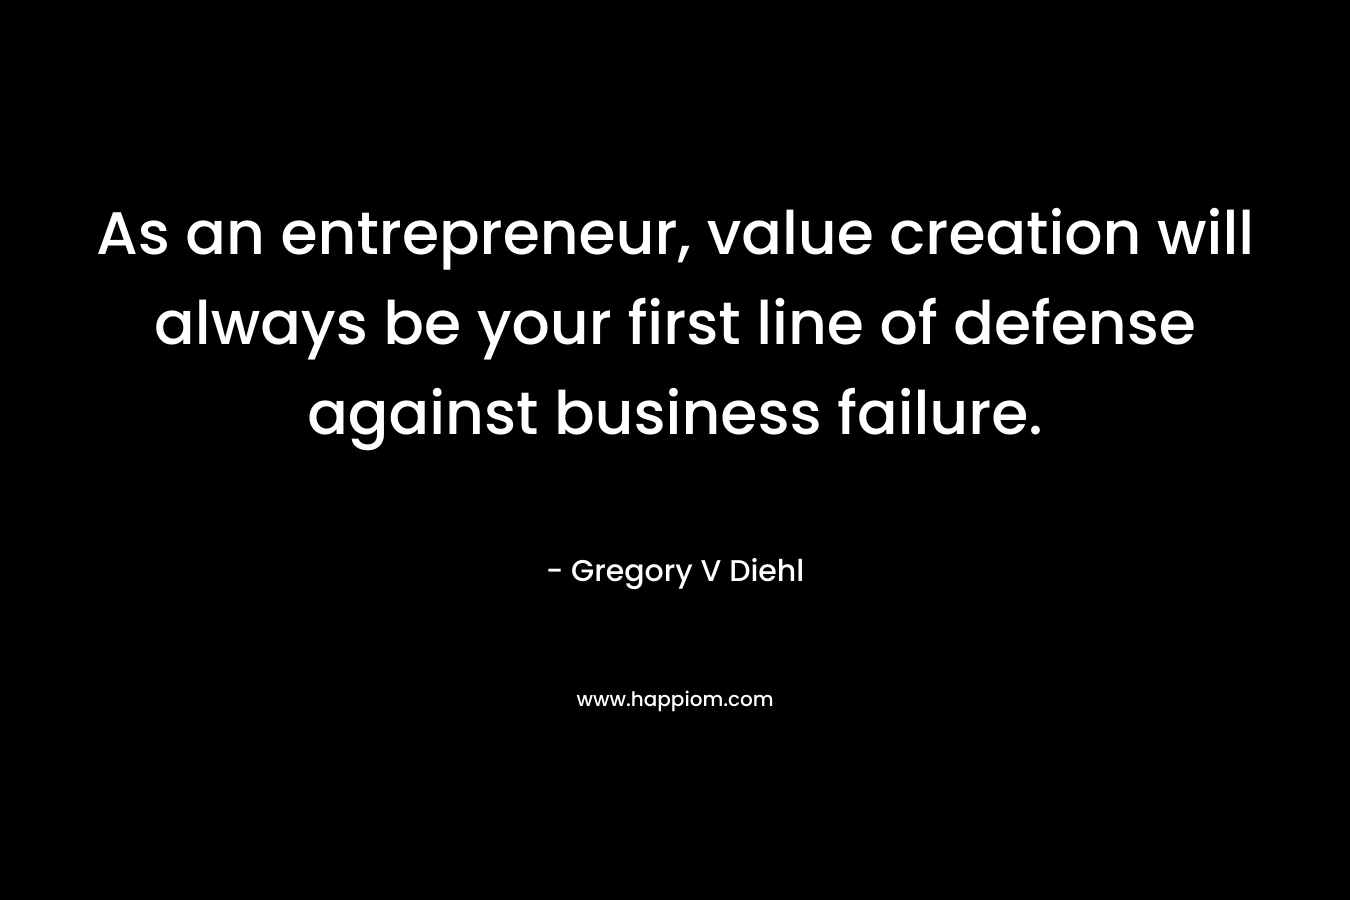 As an entrepreneur, value creation will always be your first line of defense against business failure.